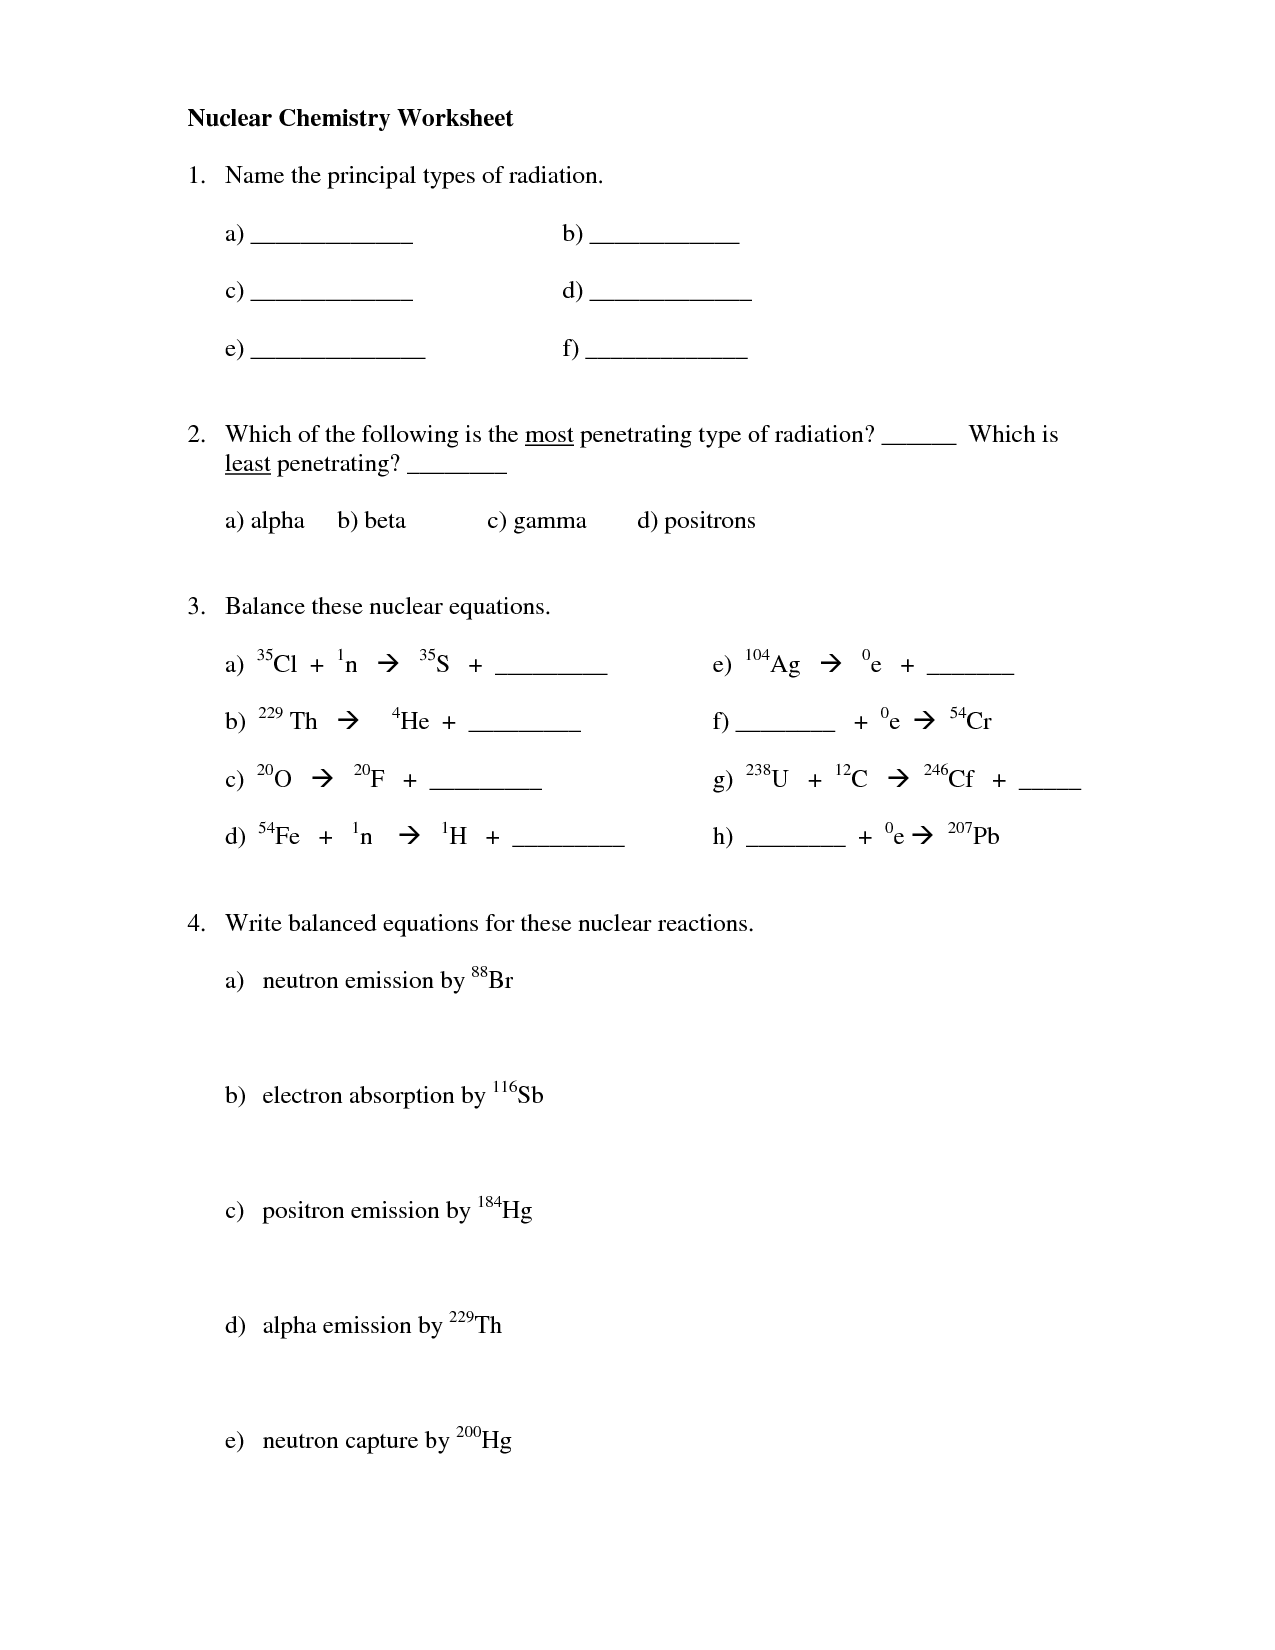 15-best-images-of-nuclear-chemistry-worksheet-answer-key-nuclear-decay-worksheet-answer-key